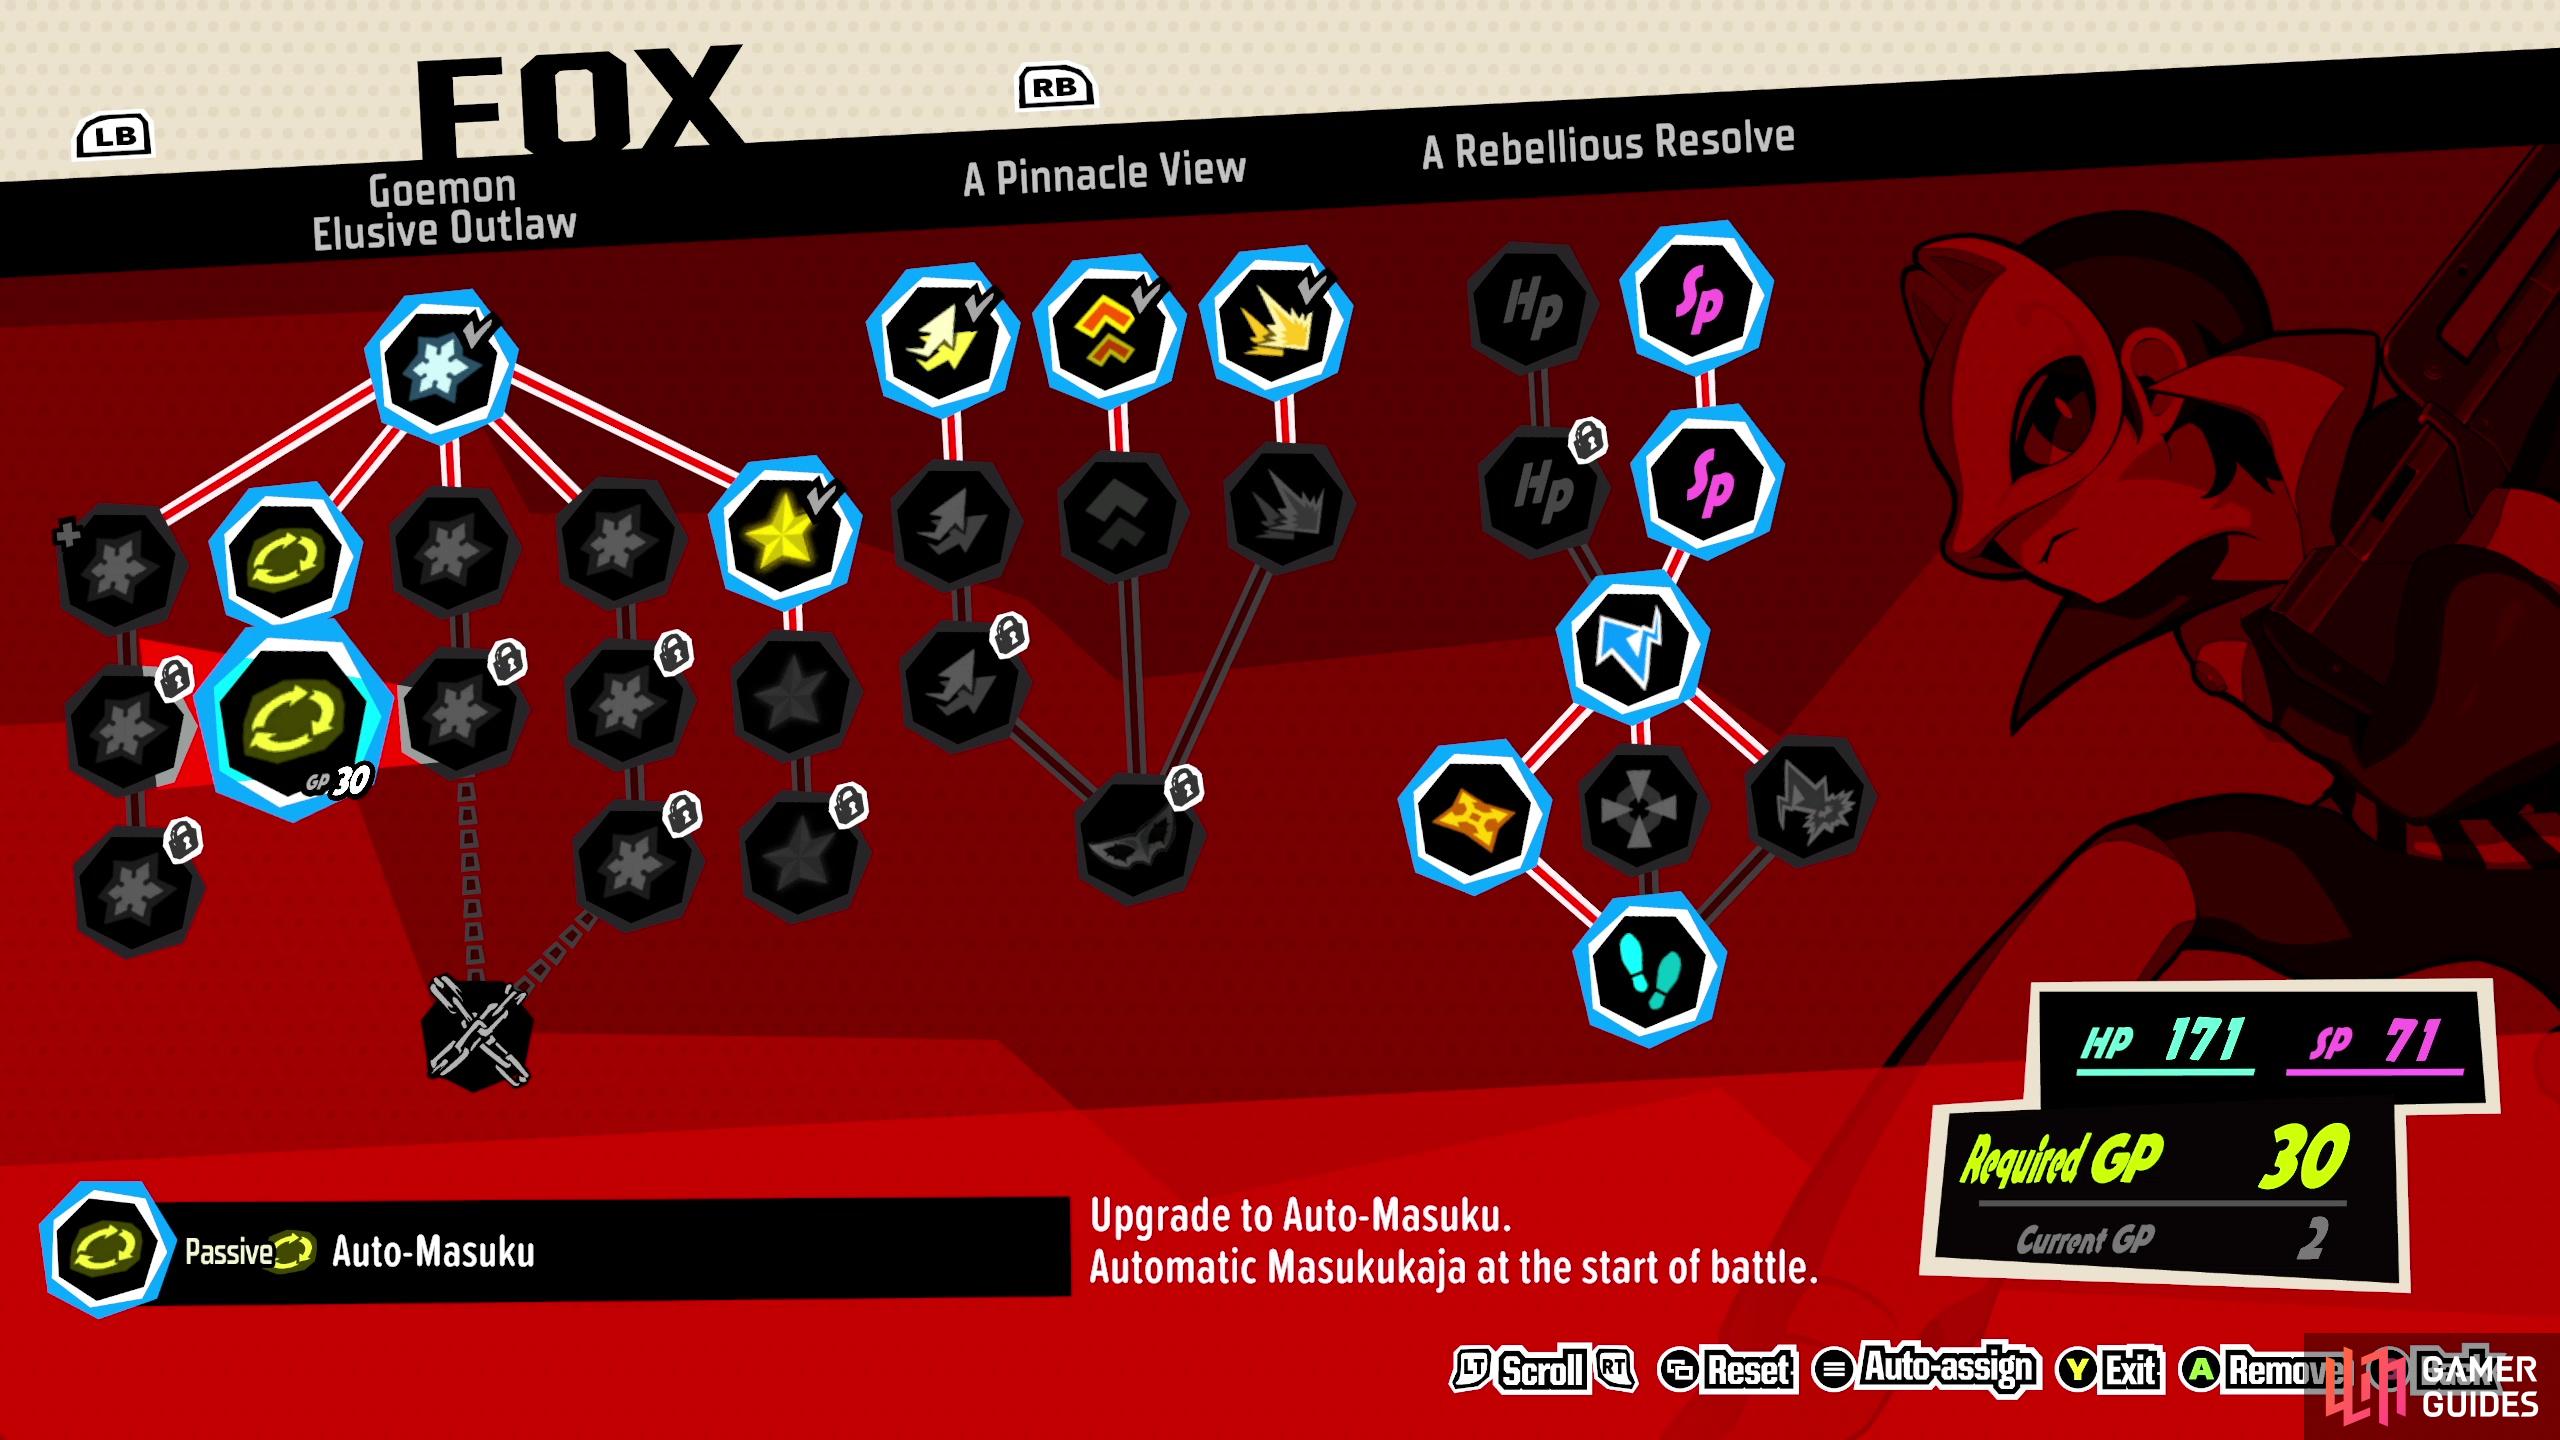 Auto-Masuku gives the entire party the Sukukaja buff at the start of combat, making it the crown jewel of Yusuke’s skill tree.